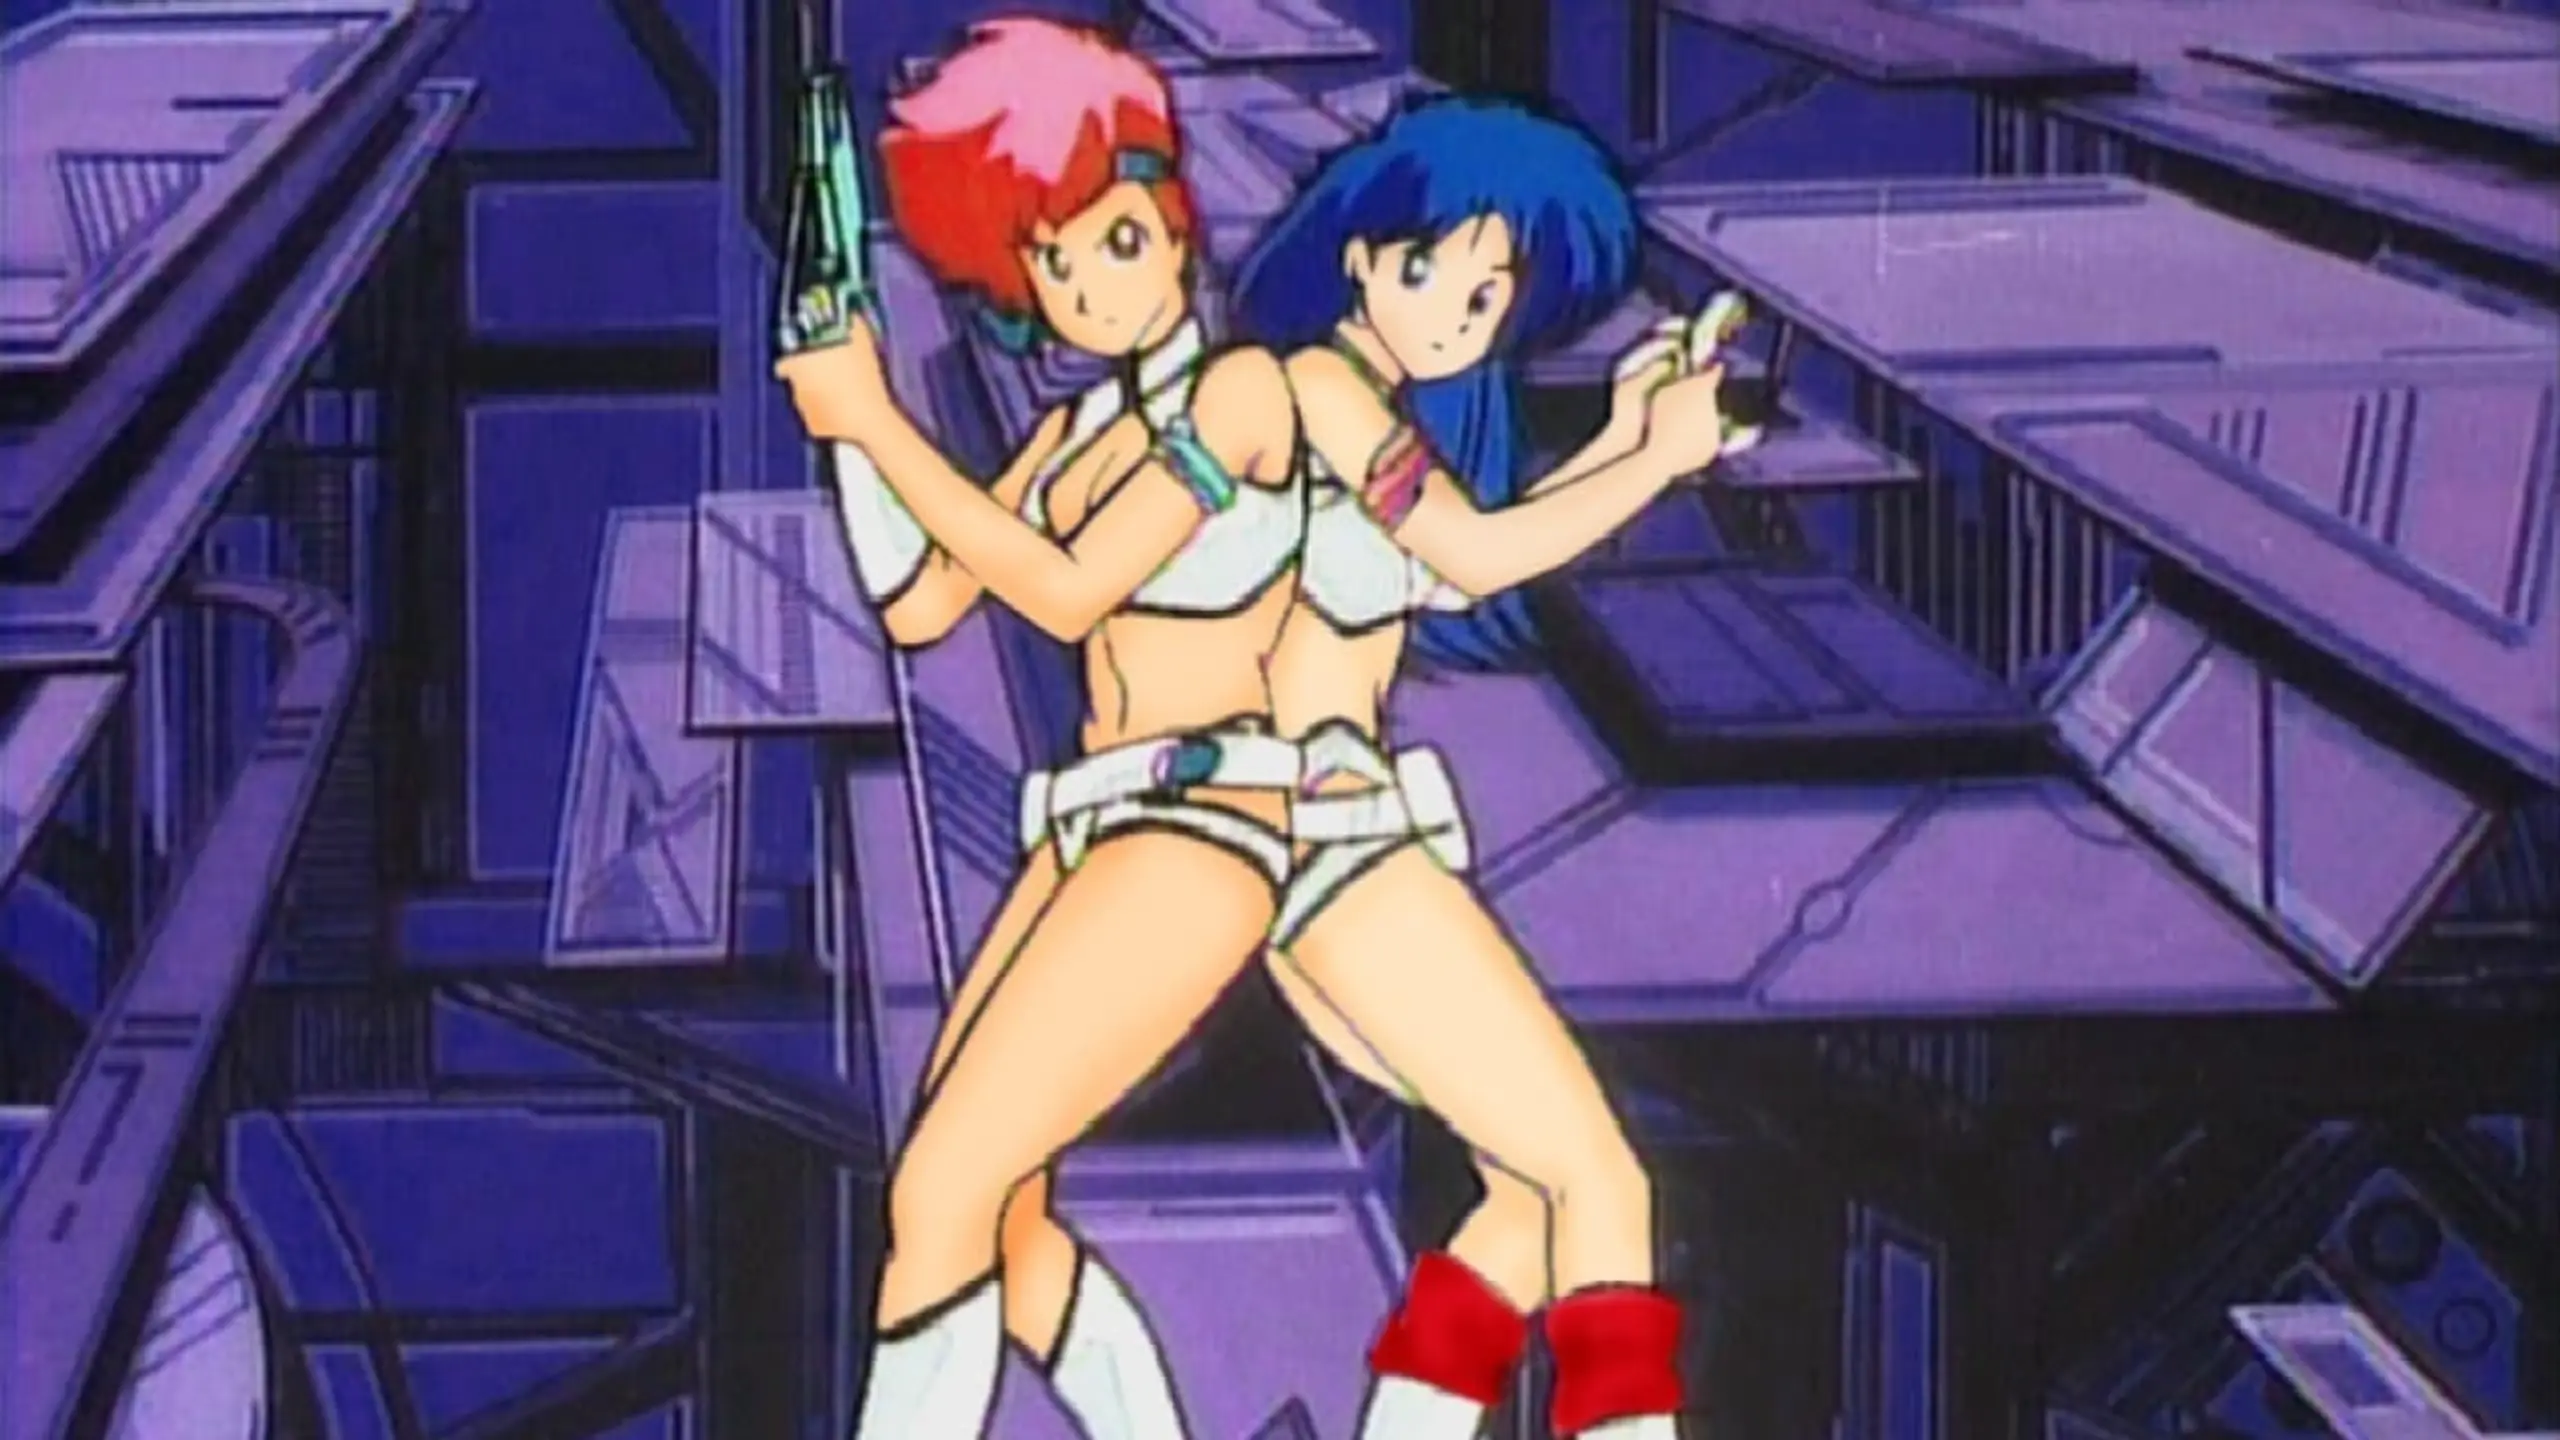 Dirty Pair: From Lovely Angels with Love